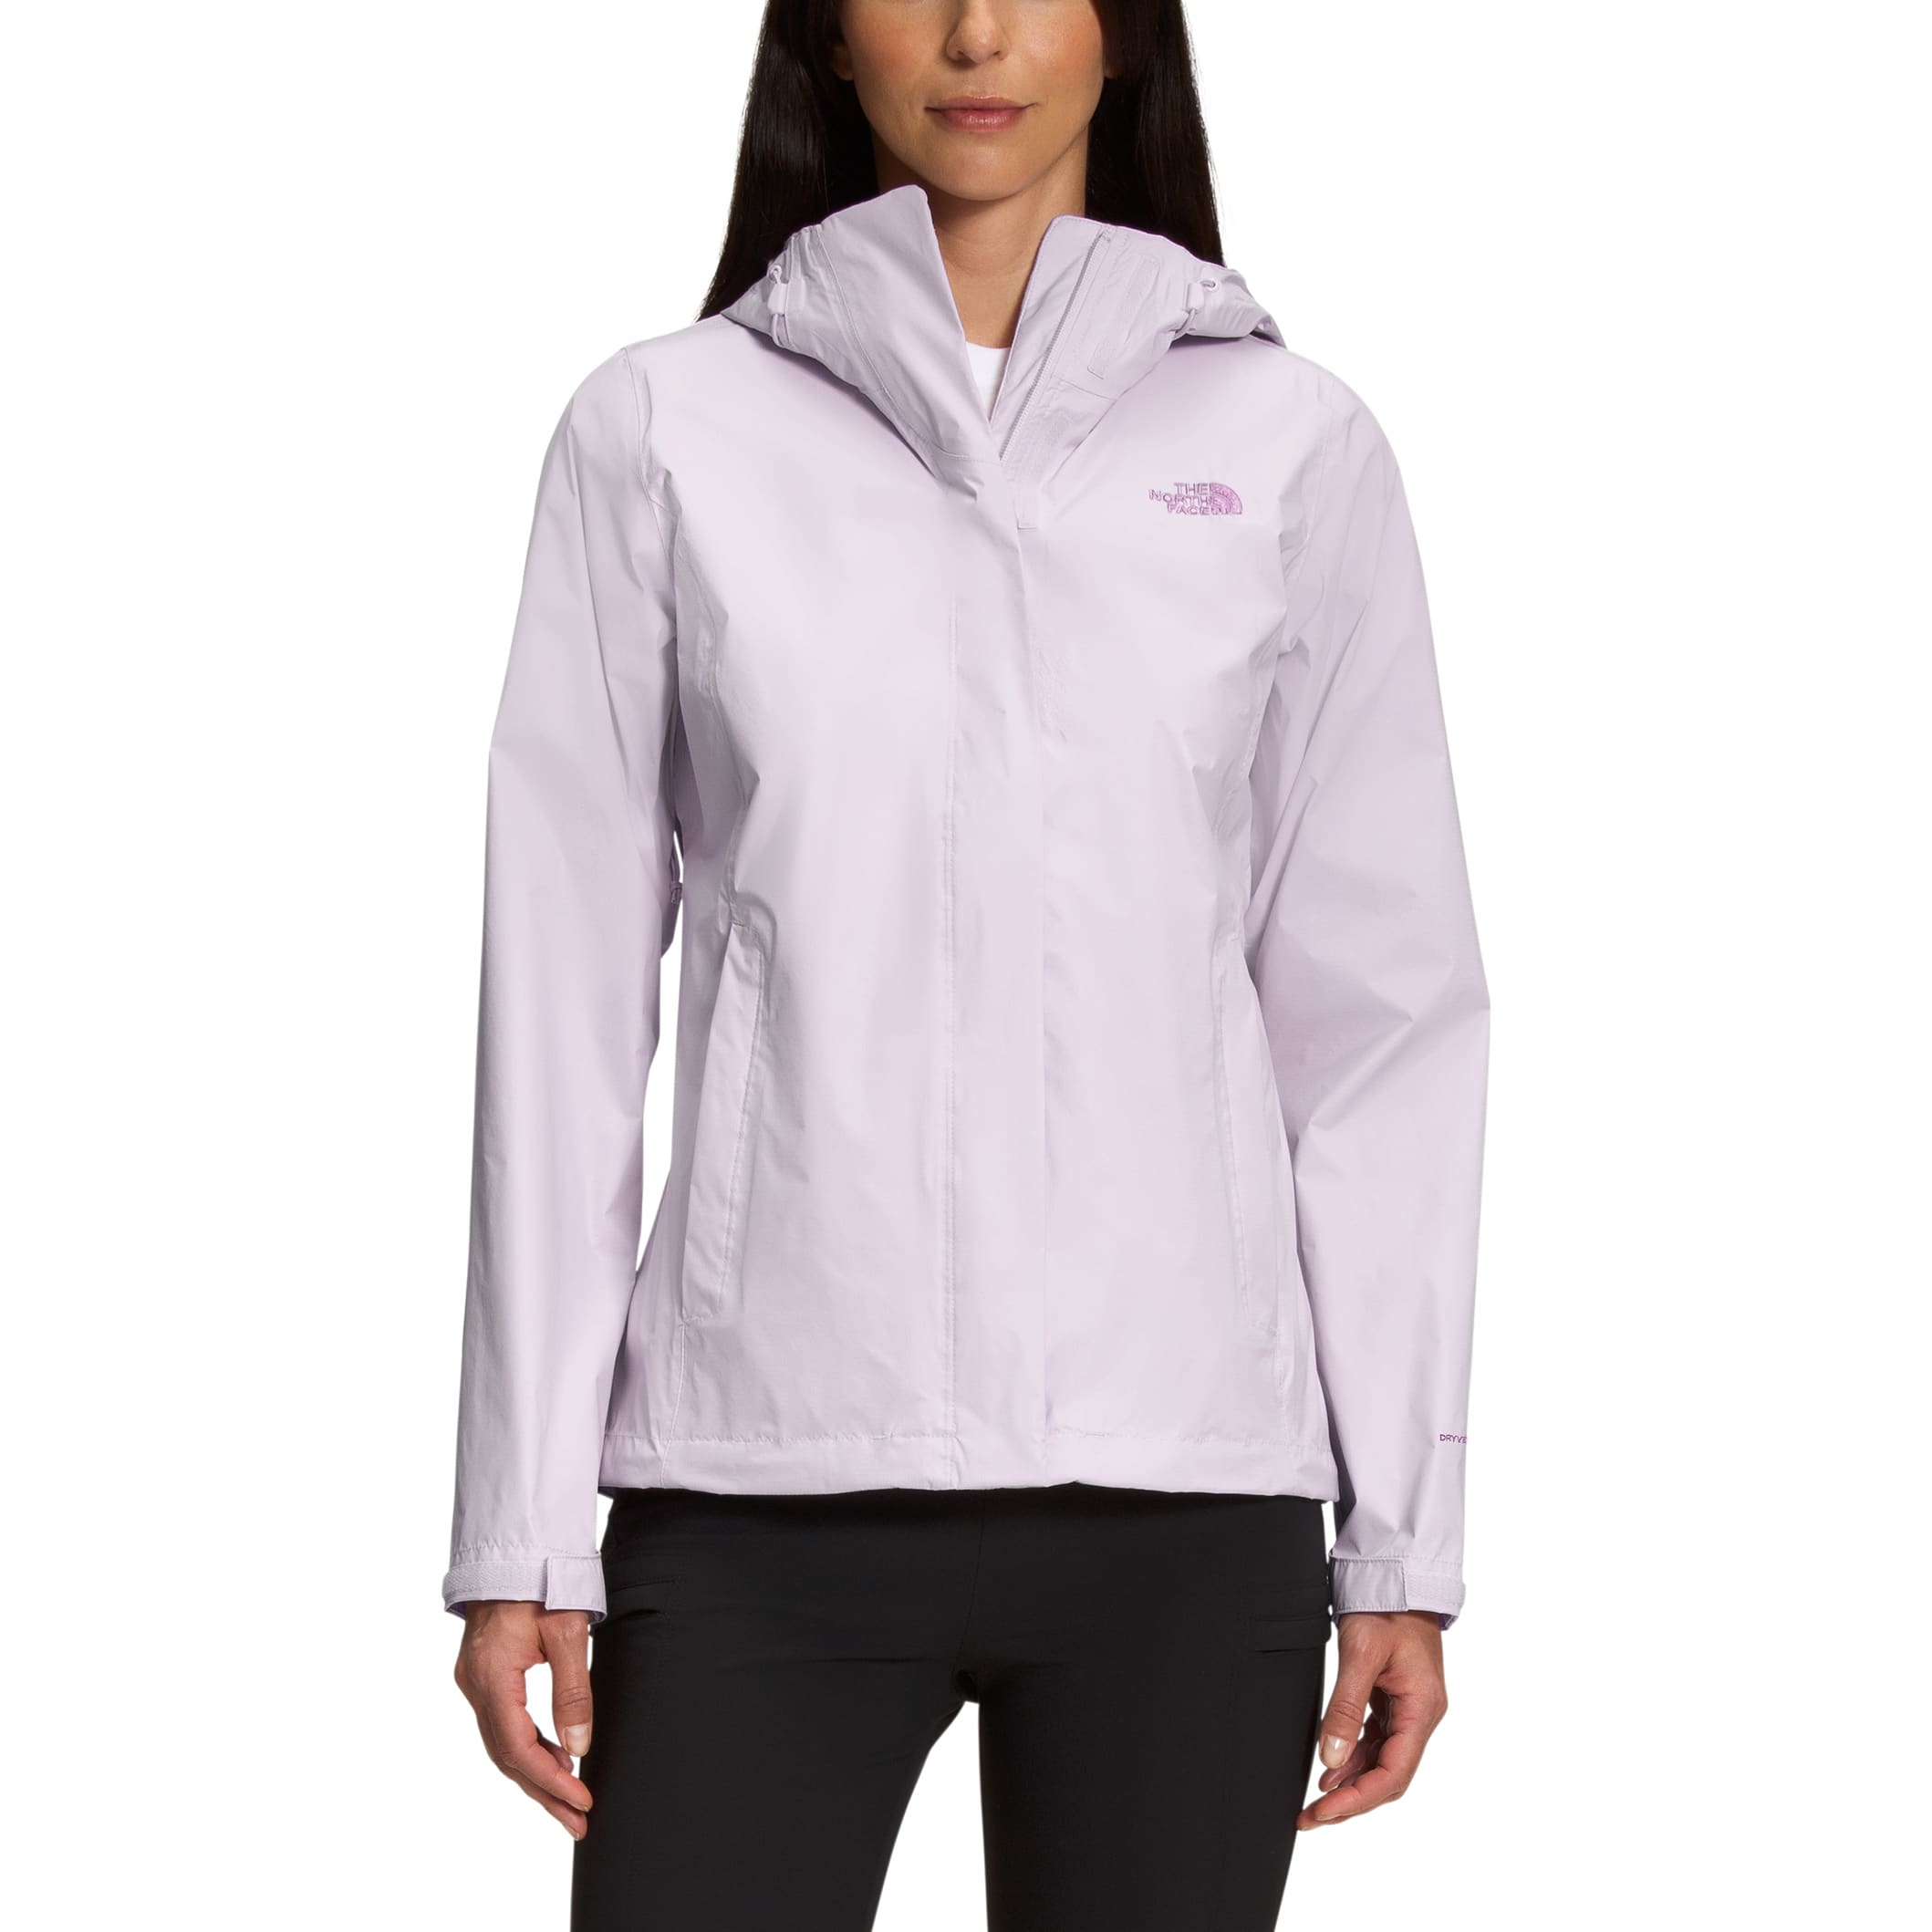 The North Face® Women’s Venture 2 Jacket